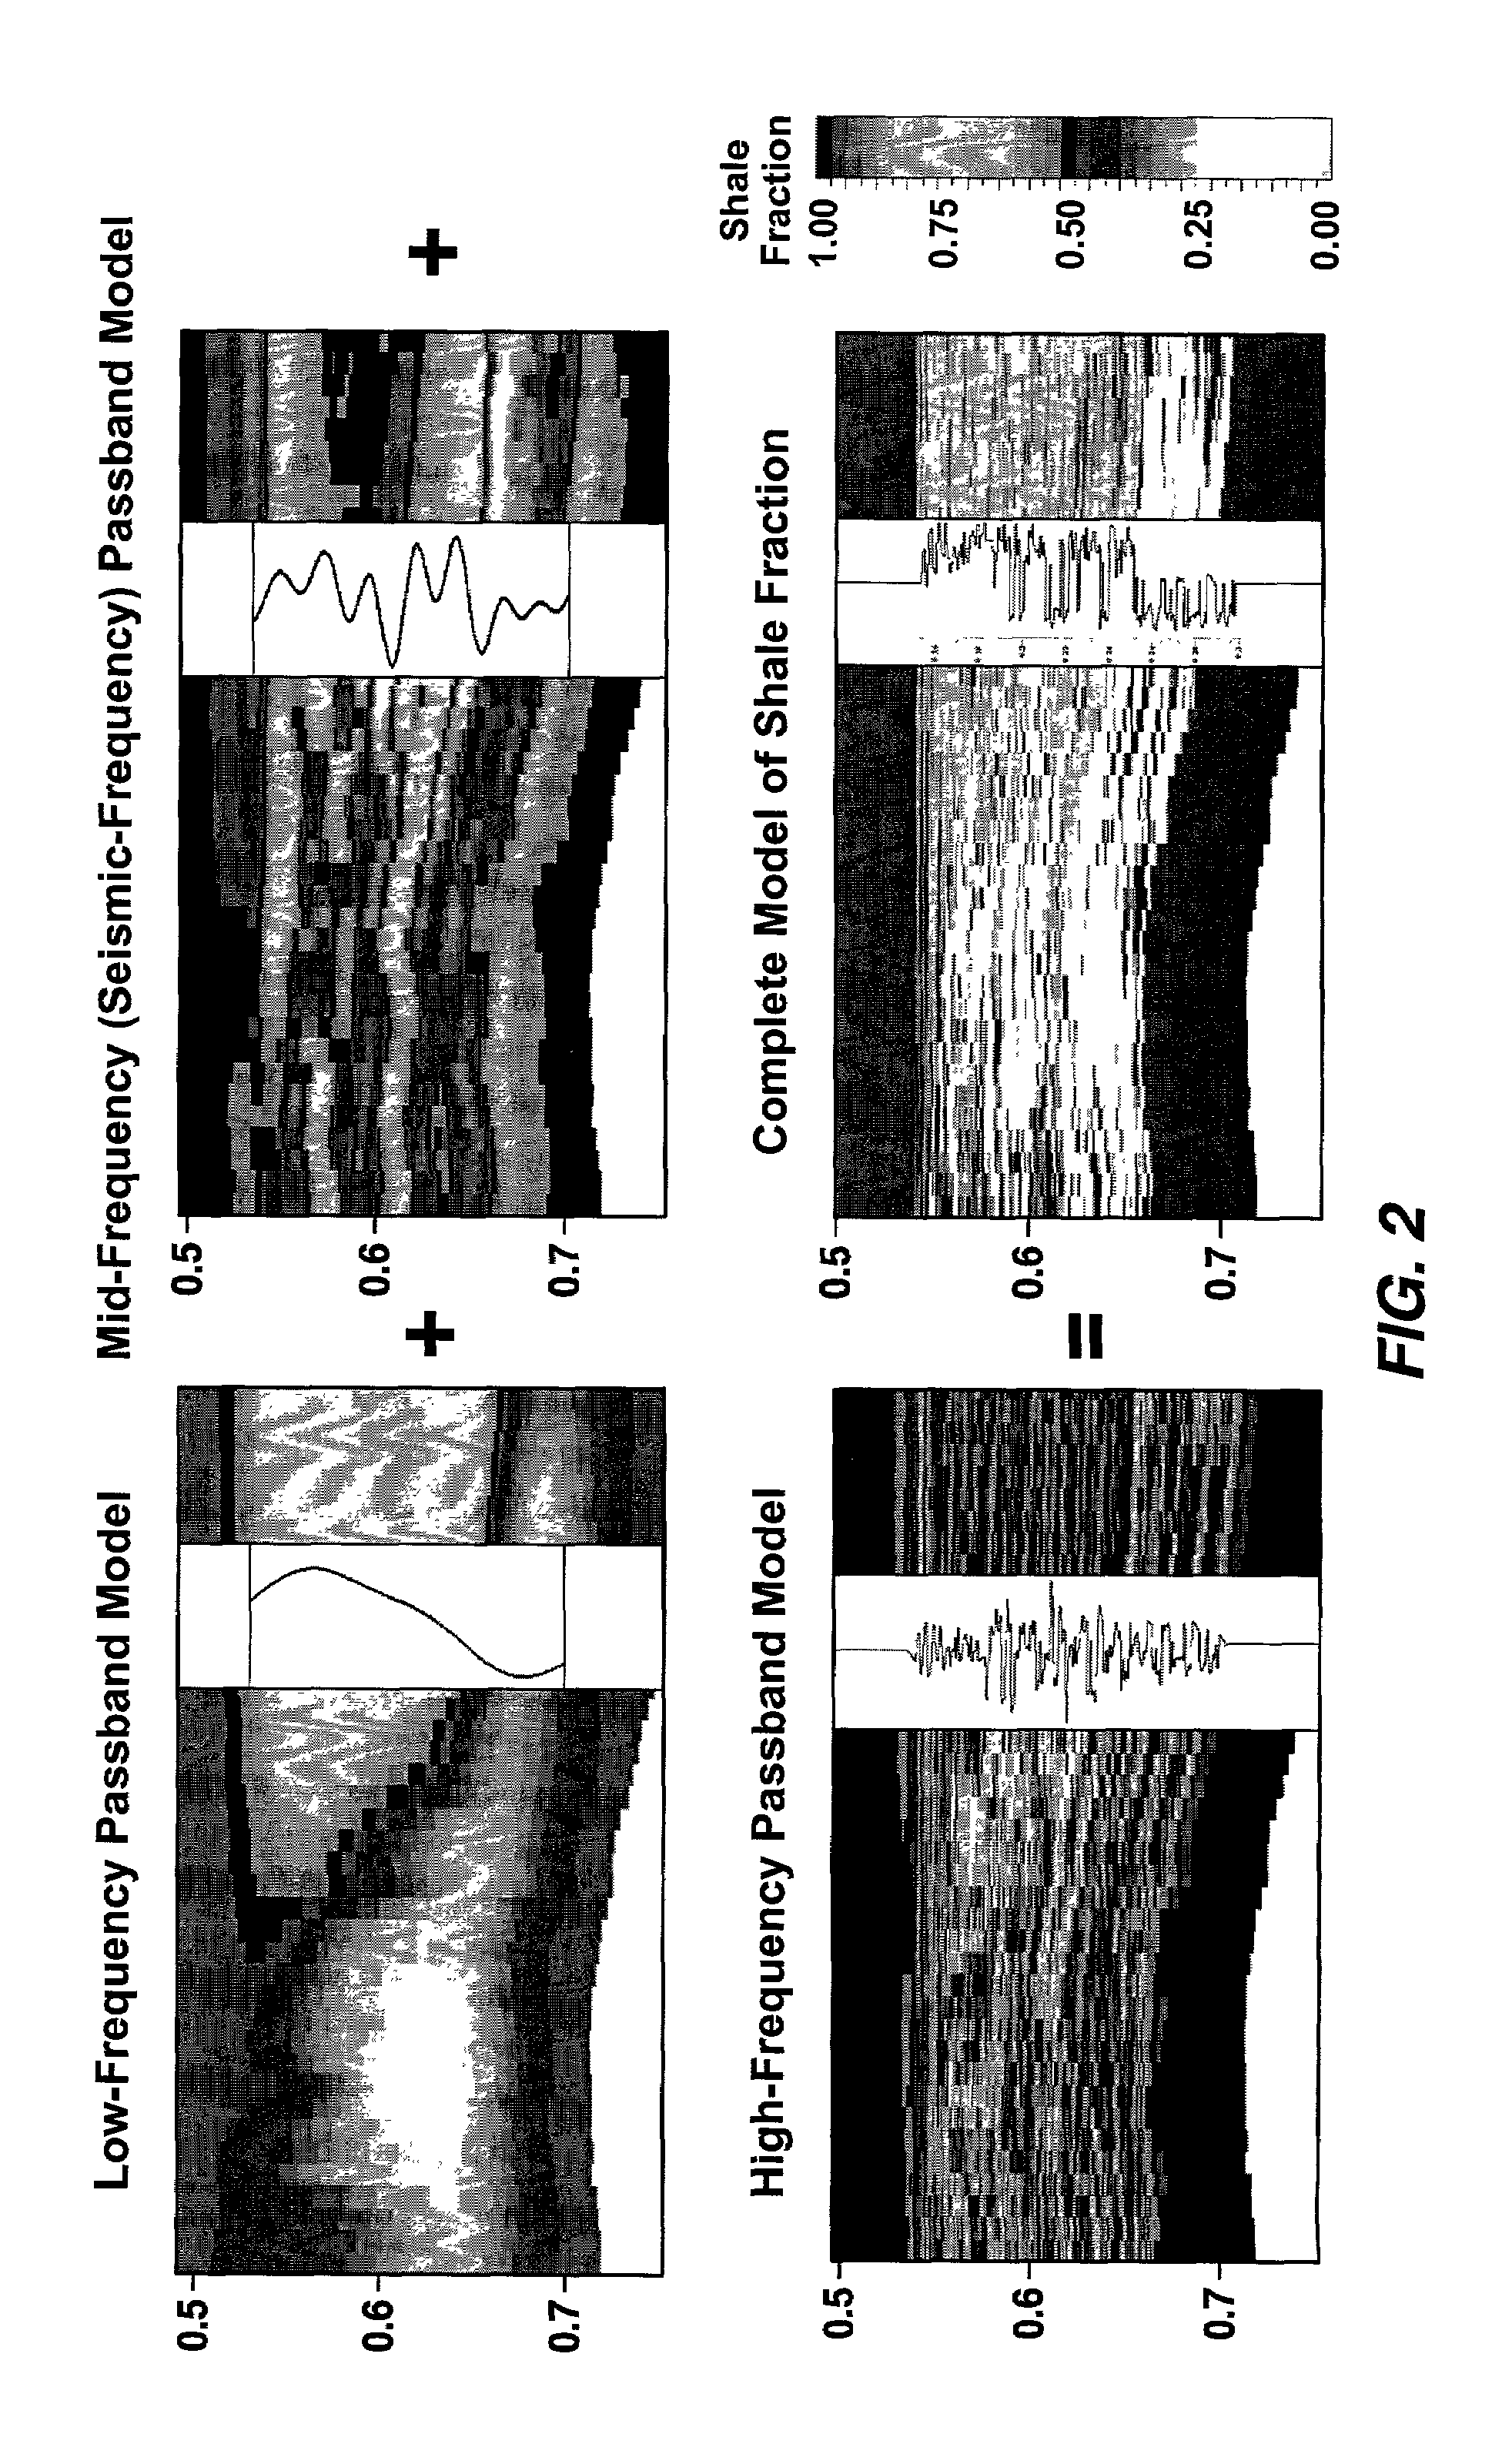 Method for constructing 3-D geologic models by combining multiple frequency passbands